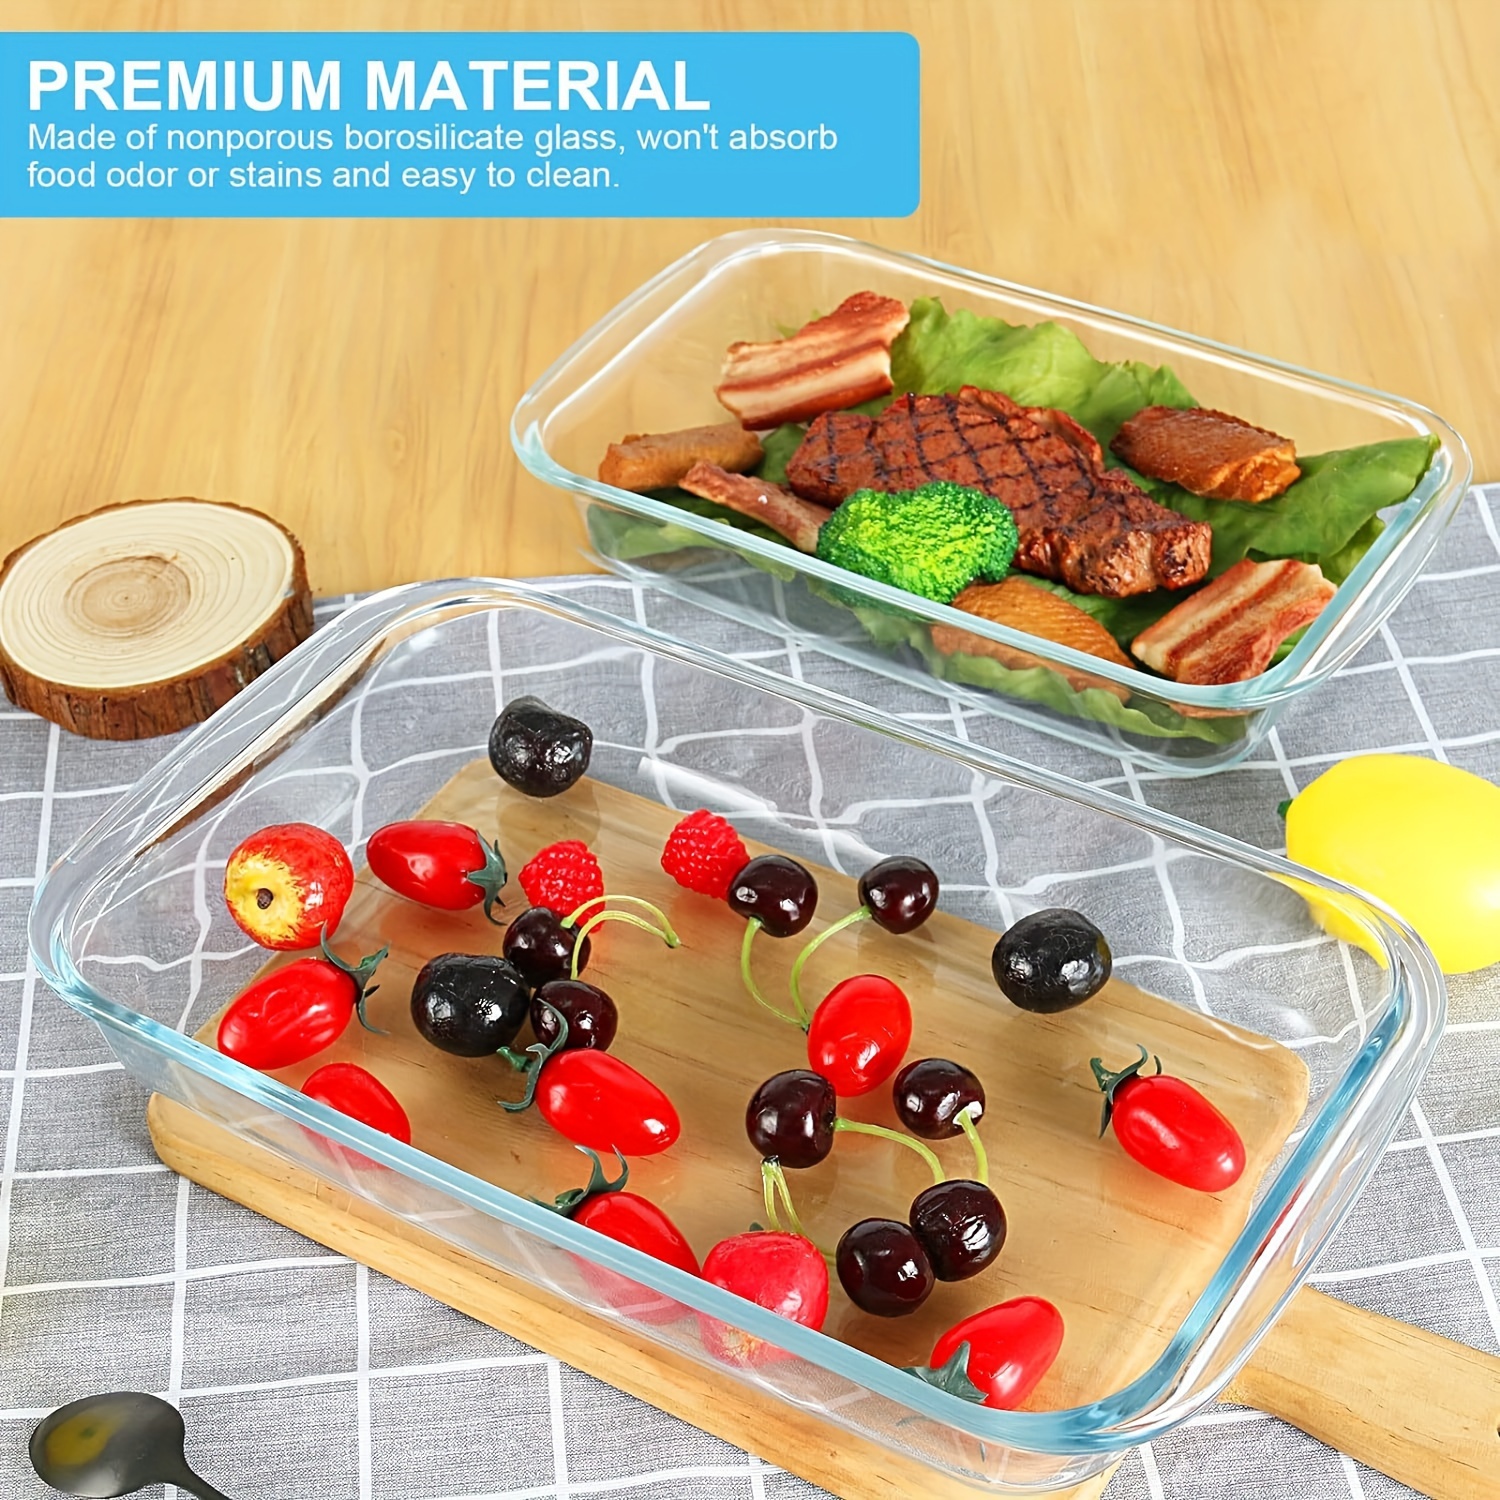 

2pcs, Glass Baking Dish, Tempered Glass Baking Pan, Microwave And Oven Safe, Home Kitchen Accessories